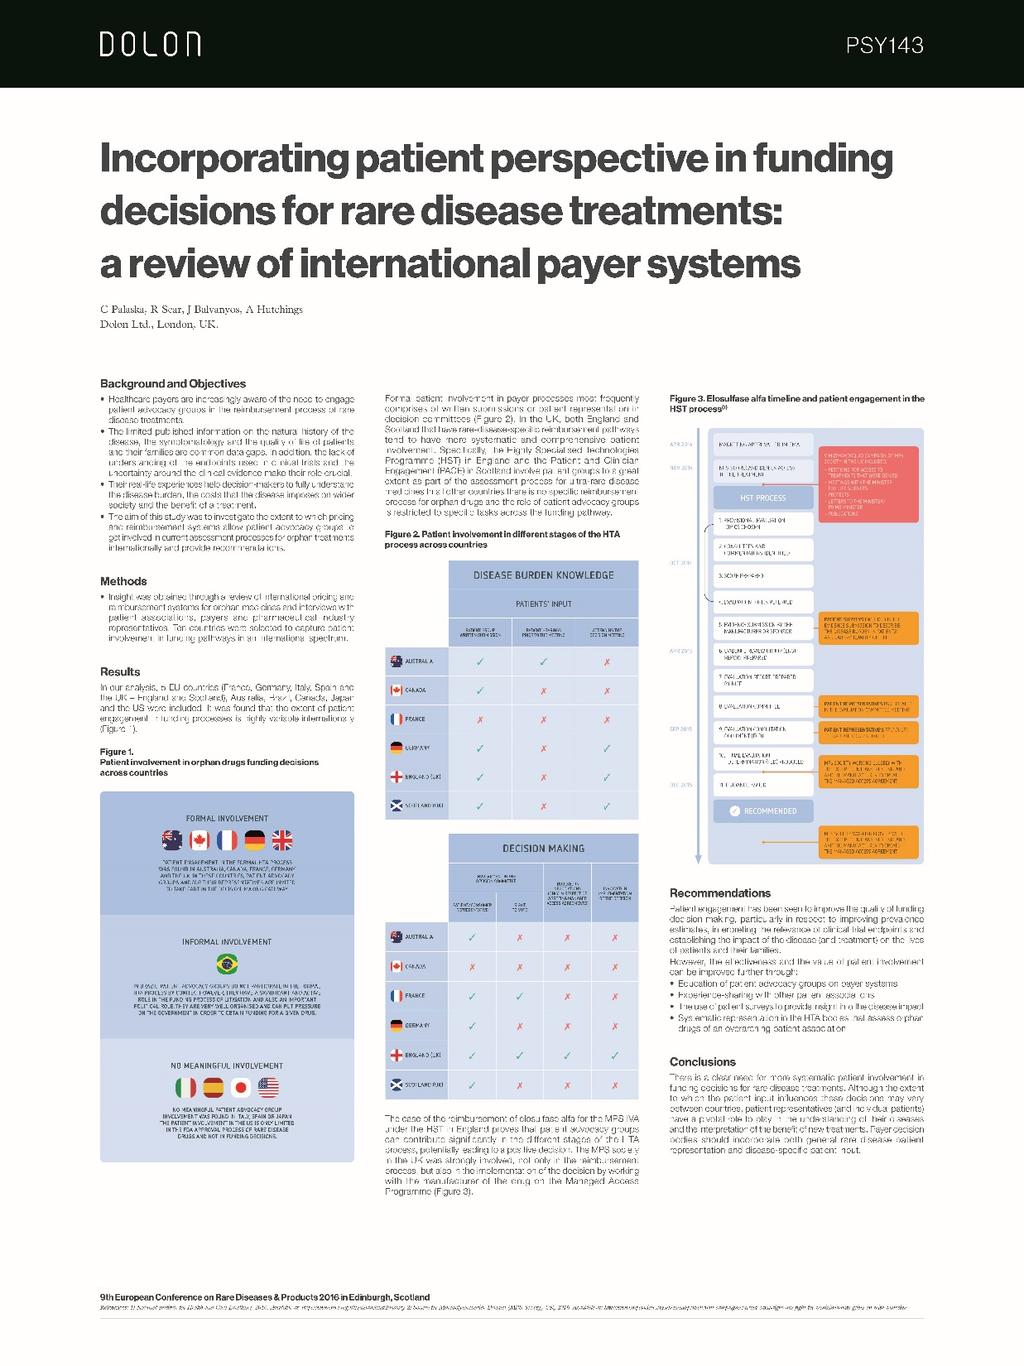 Incorporating Patient Perspective in Funding Decisions for Rare Disease Treatments Educate payers long before drug approval Burden of disease on patient and